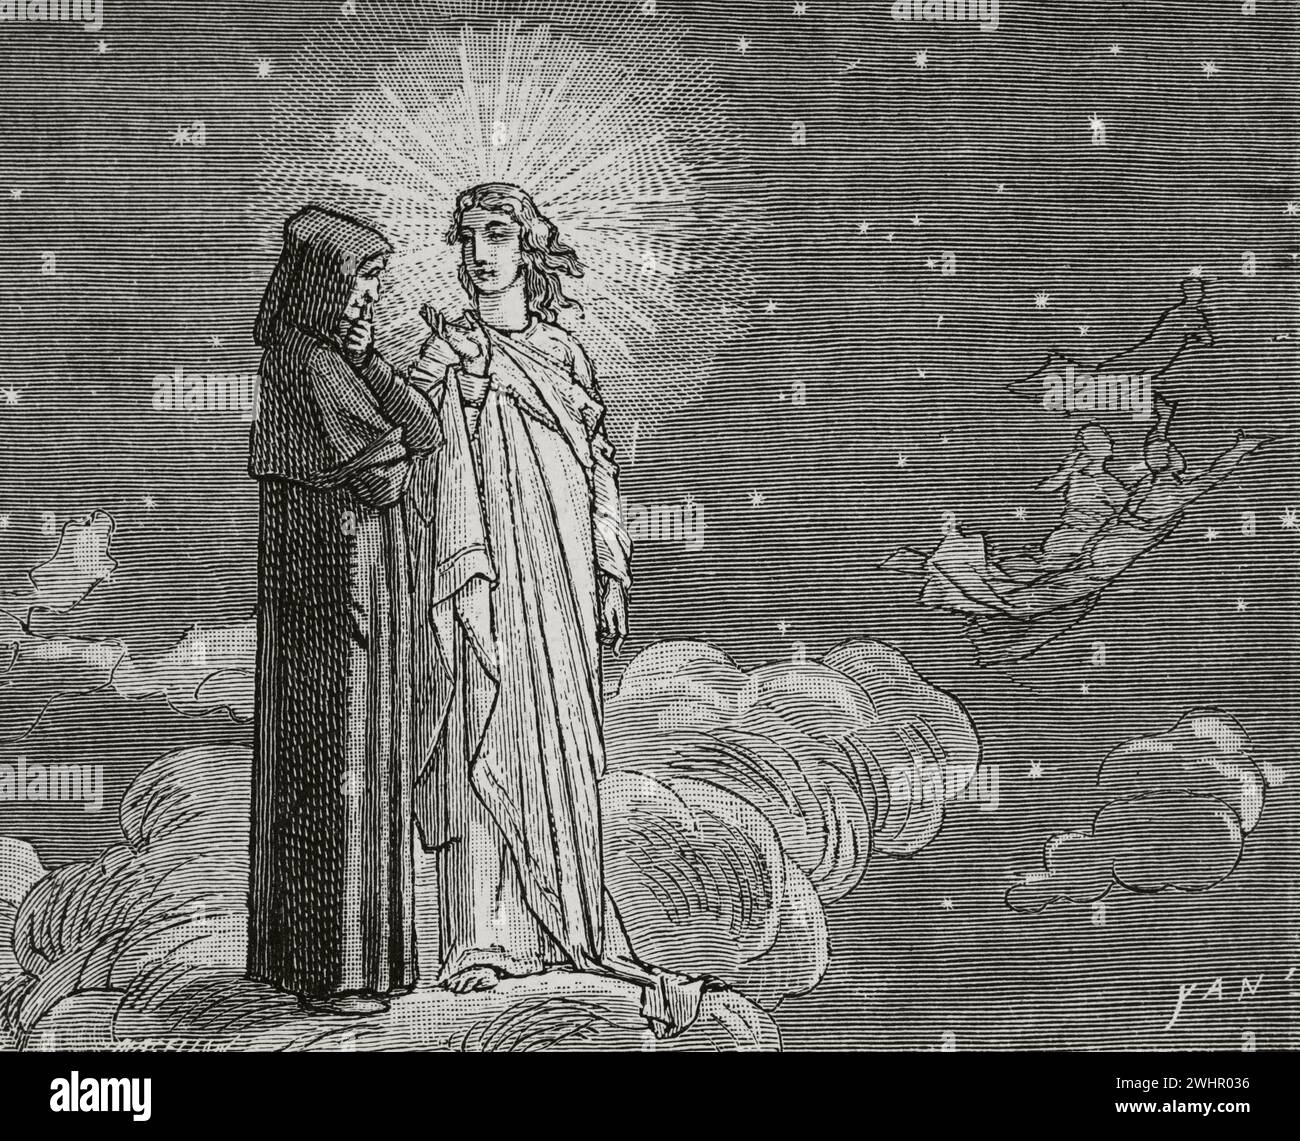 The Divine Comedy (1307-1321). Italian narrative poem by the Italian poet Dante Alighieri (1265-1321). The Paradise. 'Beatrice... started to tell me...' Illustration by Yann Dargent (1824-1899). Engraving. Published in Paris, 1888. Stock Photo